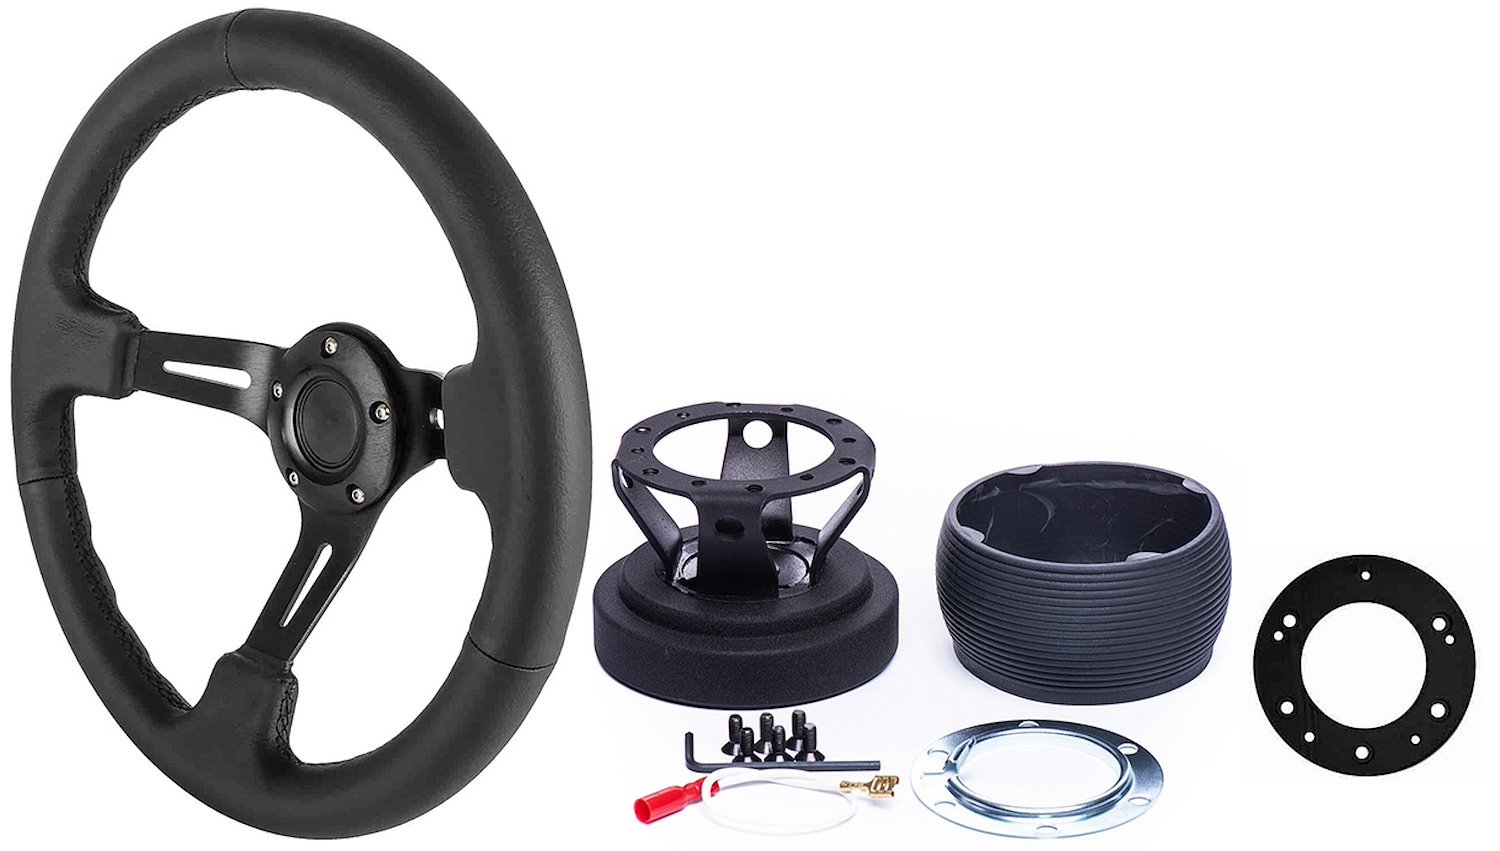 Aluminum Hub Adapter, Adapter Plate, and Black Leather Racing Steering Wheel Kit [Black Frame] - Fits Select GM and Mopar Models